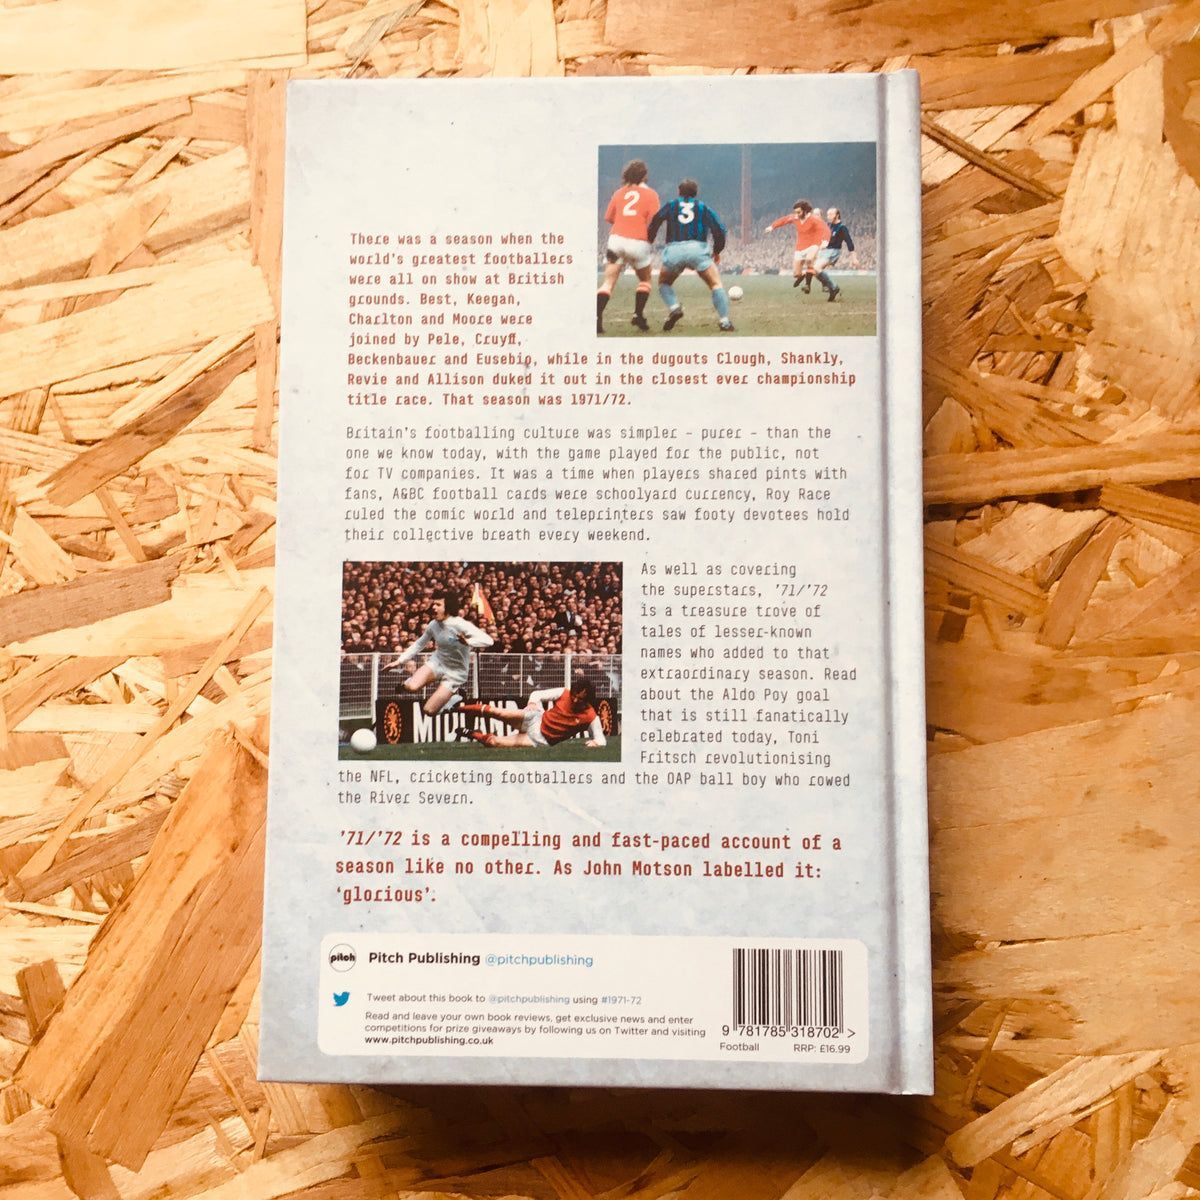 𝐑𝐄𝐒𝐓𝐎𝐂𝐊 | 71/72: FOOTBALL'S GREATEST SEASON? by Daniel Abrahams A compelling and fast-paced account of a season like no other. @71Season @PitchPublishing 🛒 stanchionbooks.com/products/71-72…